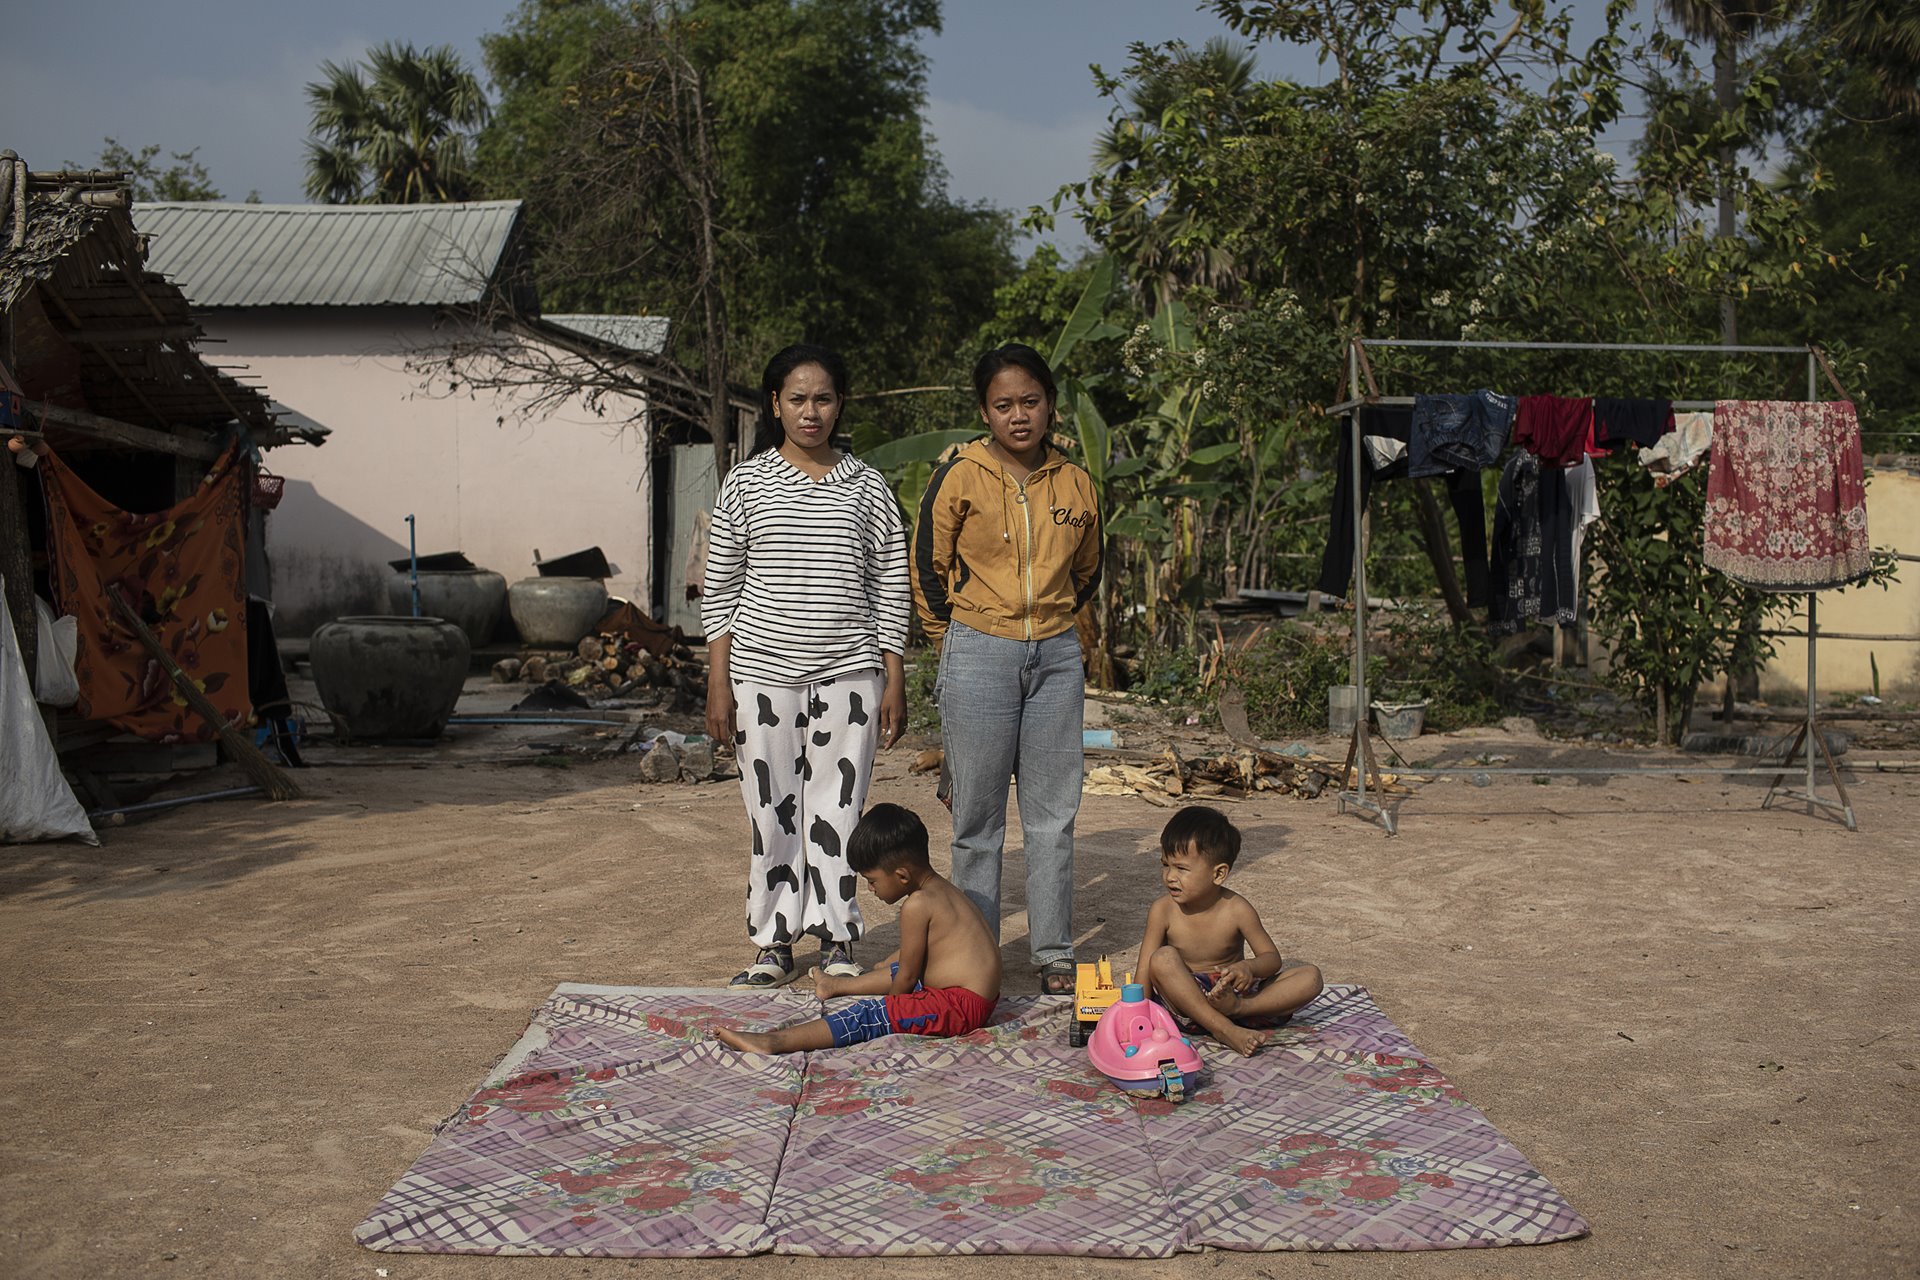 <p>Surrogate mothers Vin Win (right) and Ry Ly (left) were arrested during a raid to fight trafficking in 2018. They live near one another and their children from surrogacy, Korng (3, left) and Phavit (4, right), often play together. Vin Win is separated from her husband who resents the situation. Kampong Speu, Cambodia.&nbsp;</p>
